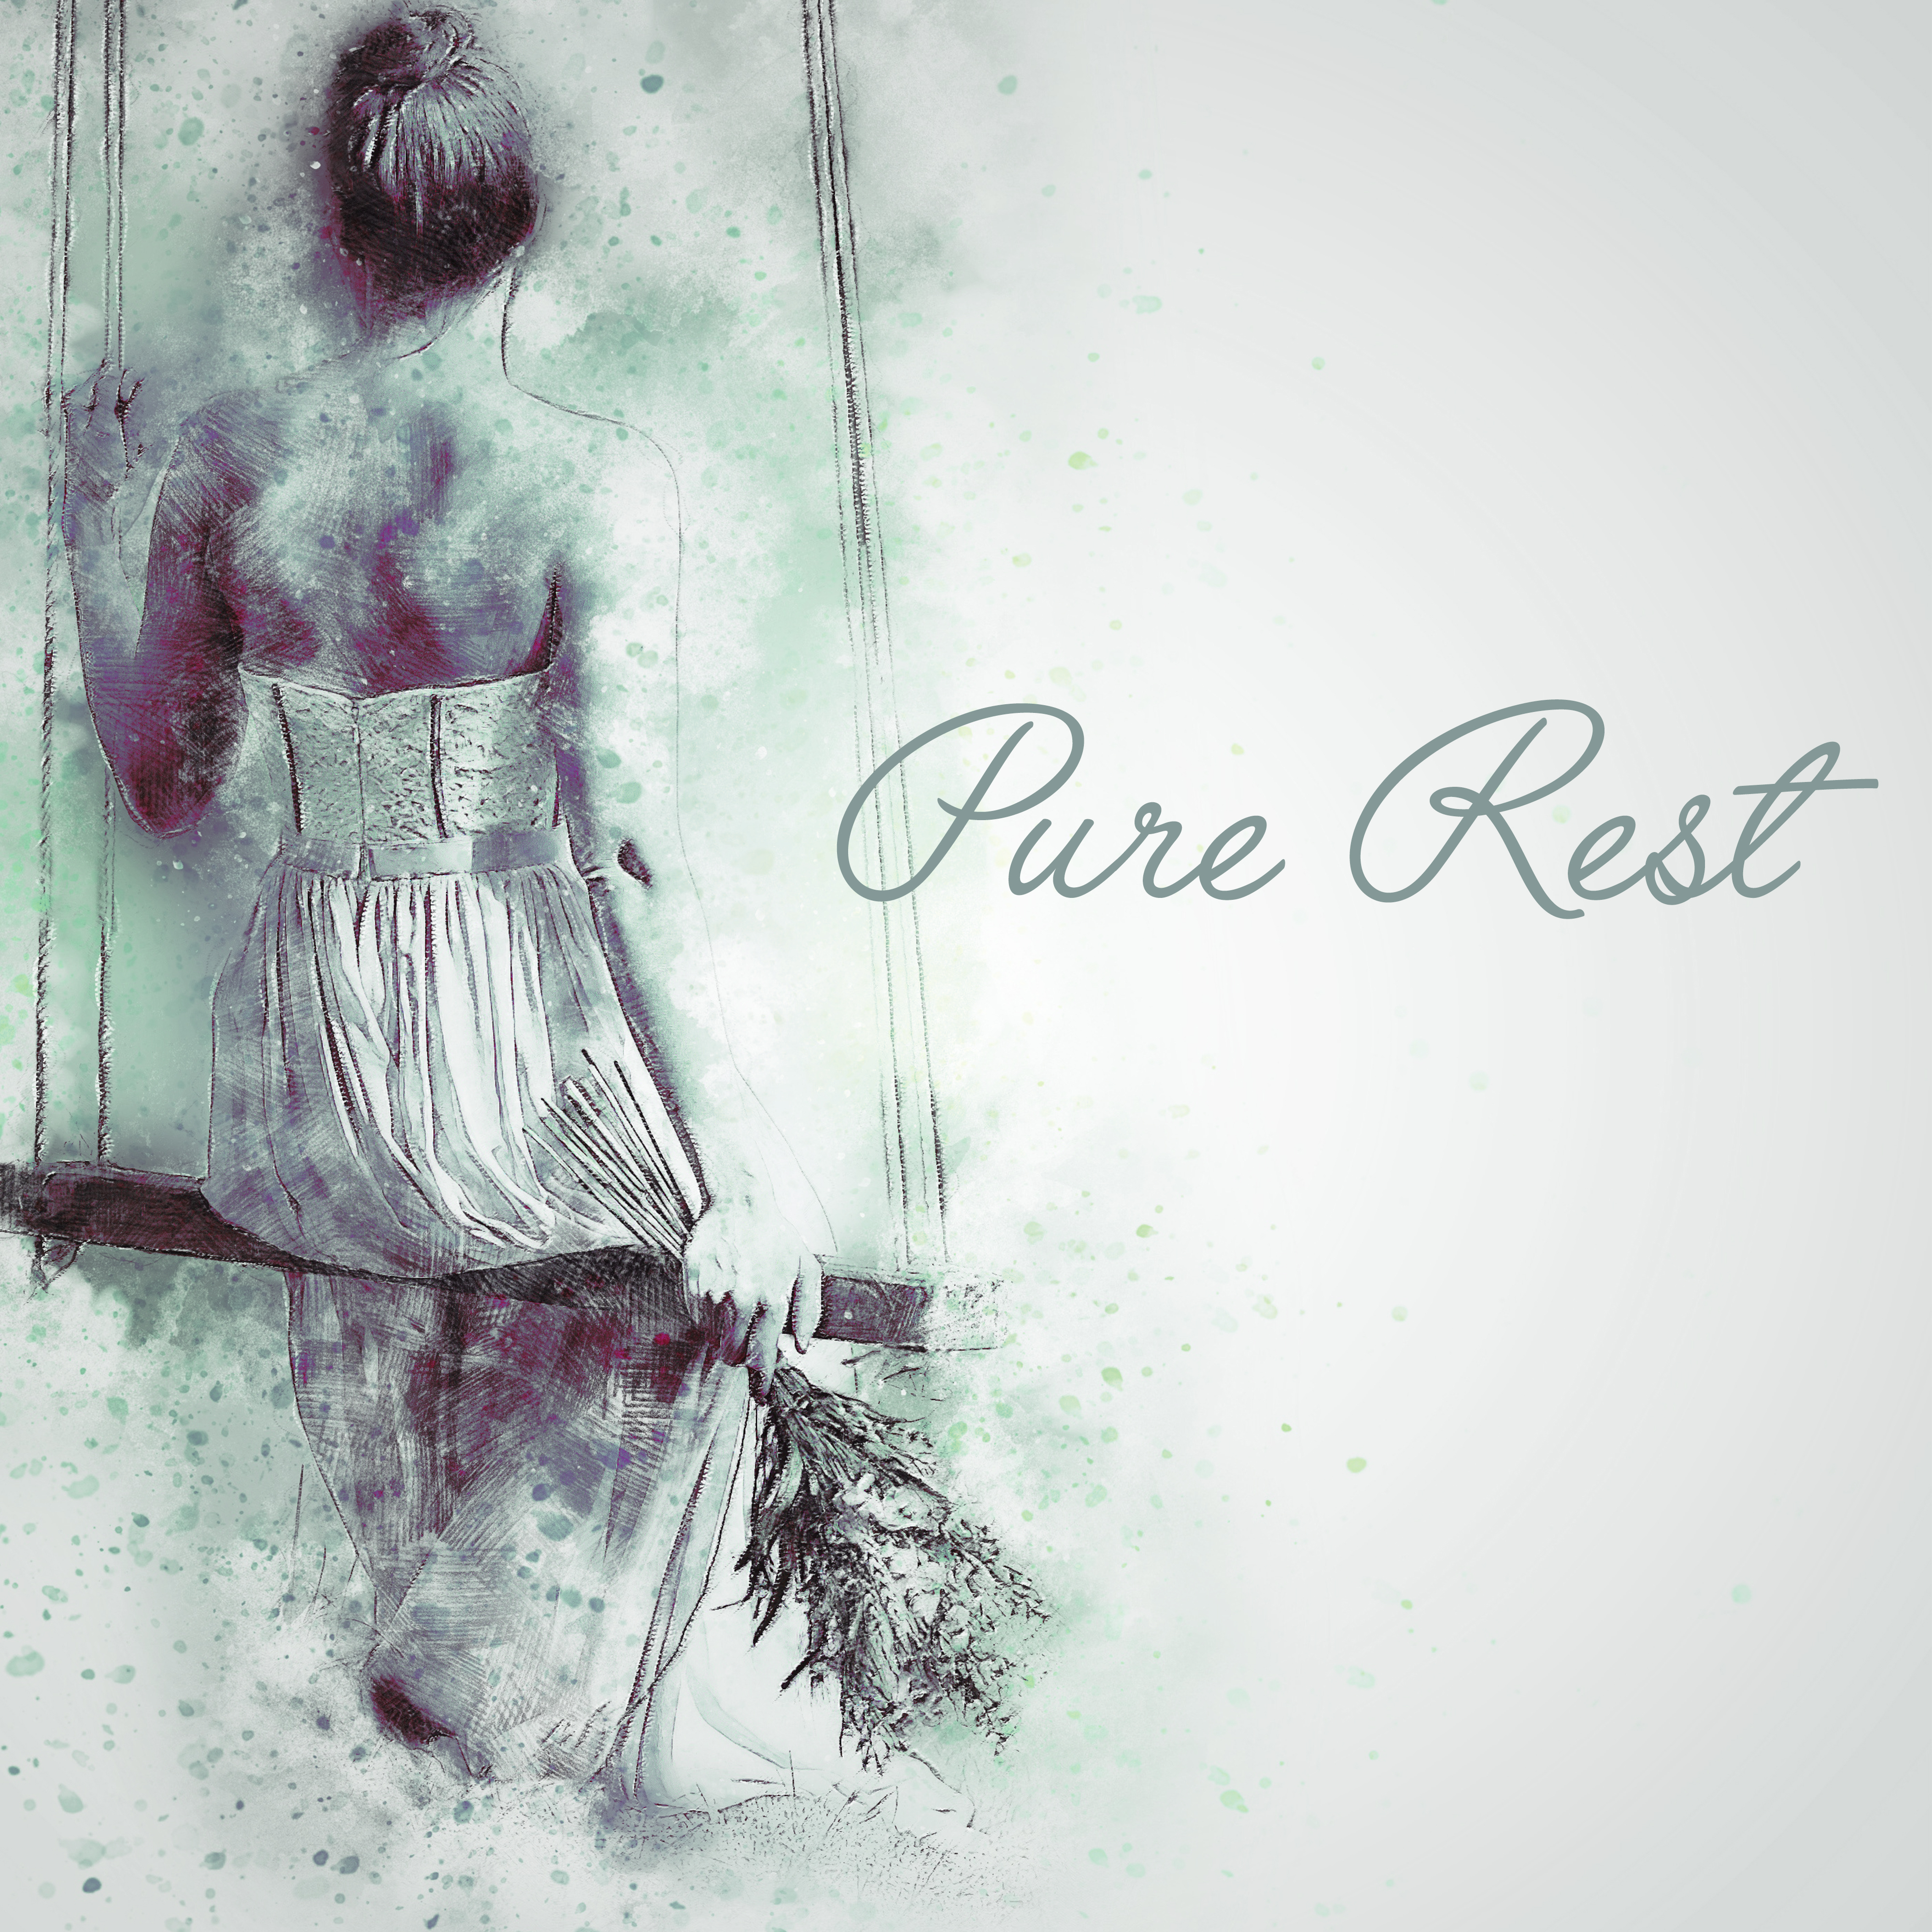 Pure Rest – Perfect Relaxation, Deep Relief, Zen Music to Calm Down, New Age Music Reduces Stress, Therapy for Peaceful Mind, Good Energy